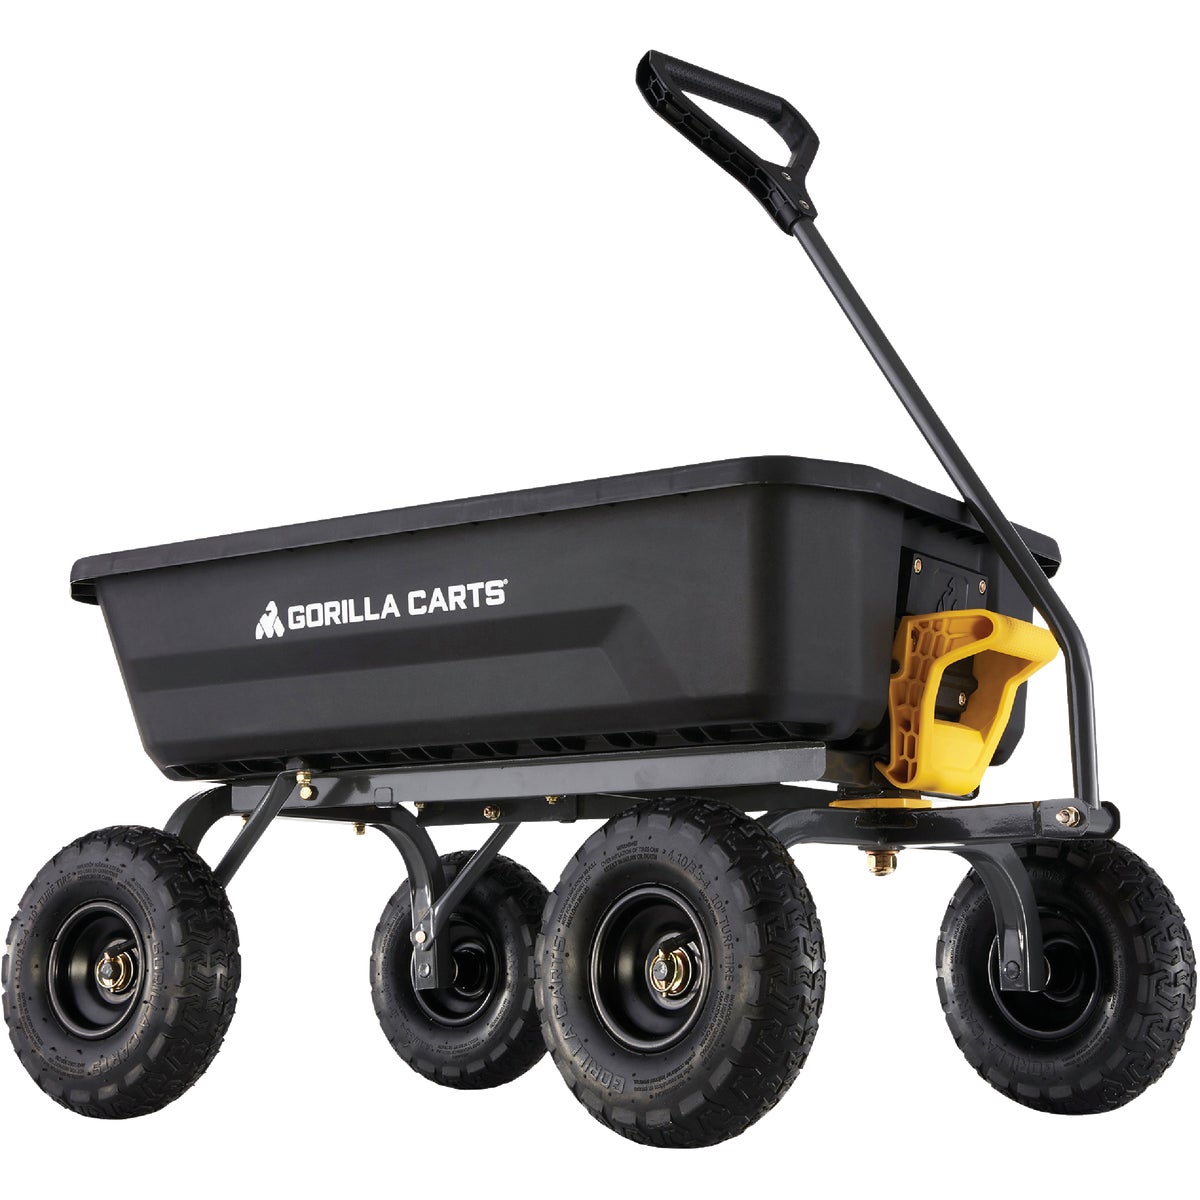 Item 747325, Perfect cart for any landscaper or lawn and garden enthusiast.